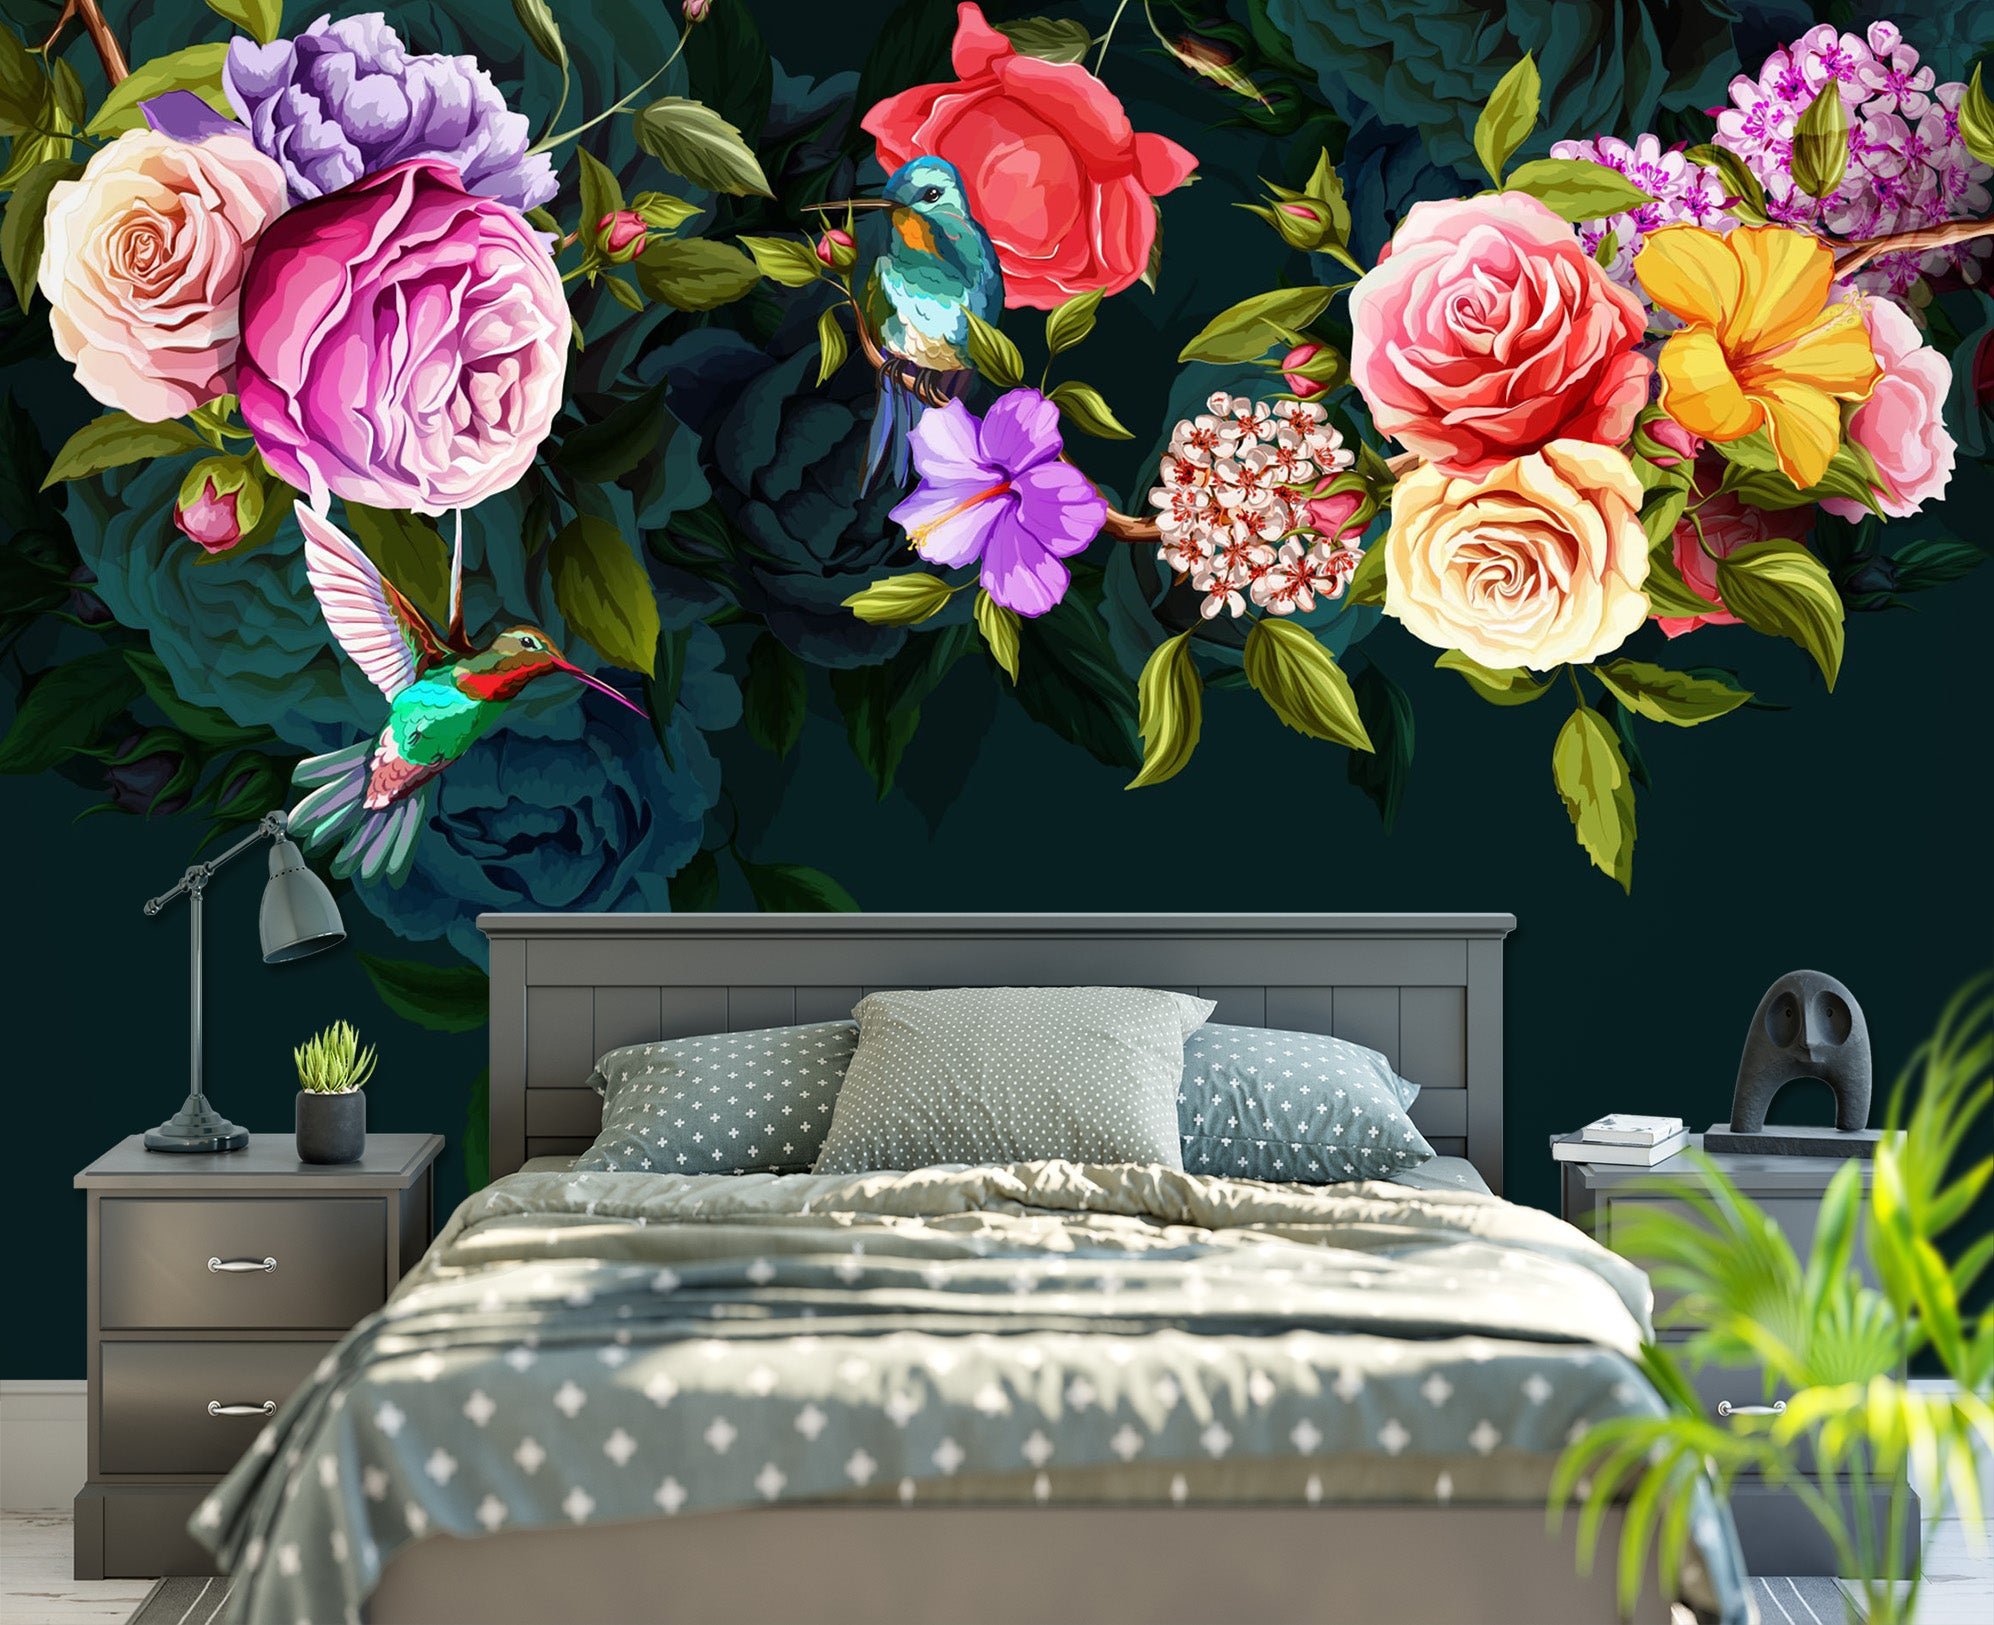 3D Colored Flowers 1613 Wall Murals